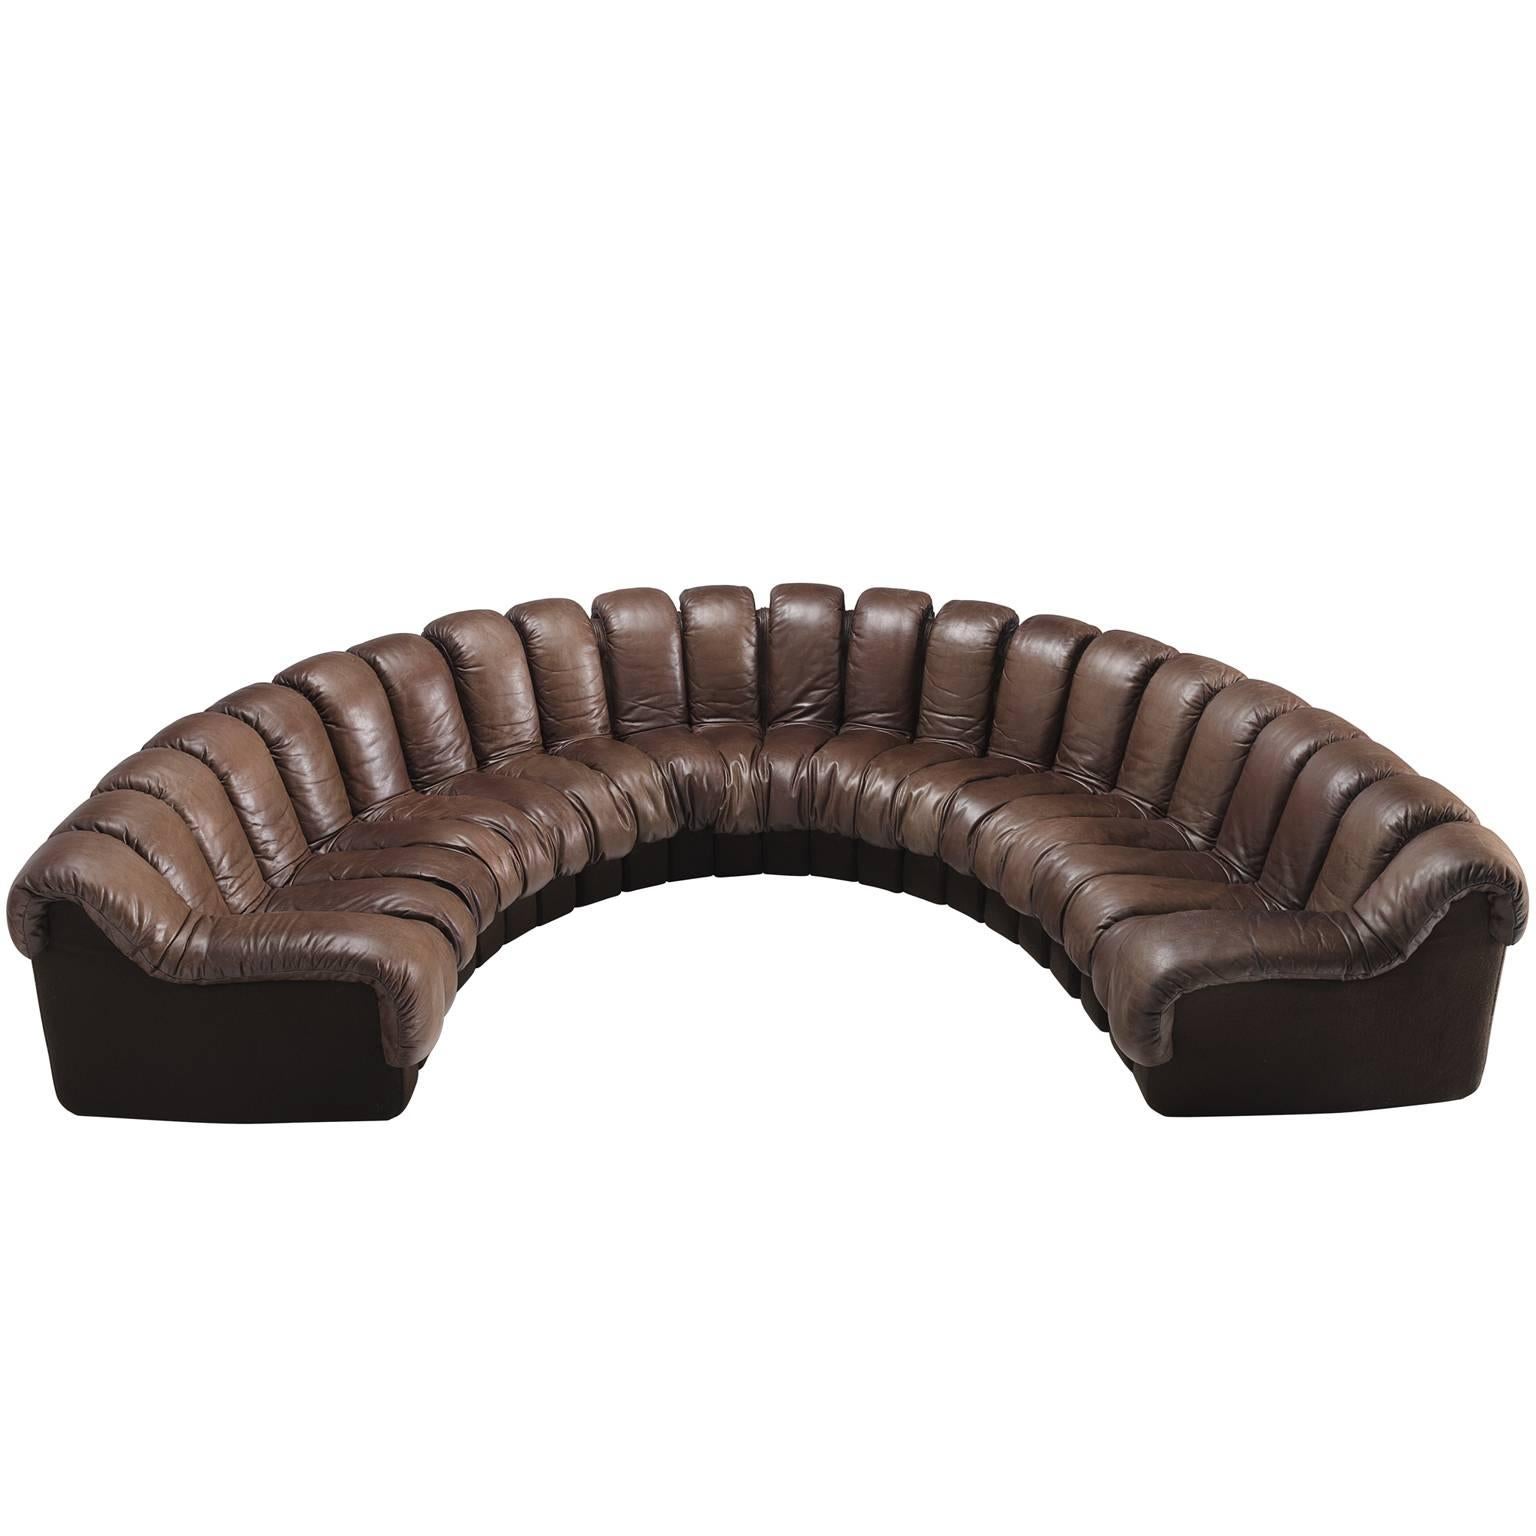 De Sede ‘Non-Stop’ DS-600, brown leather, felt, Switzerland, 1972. 

De Sede 'Non Stop' sectional sofa containing 22 pieces in original dark brown leather, of which 20 center pieces and two armrests. Any number of pieces can be zipped together